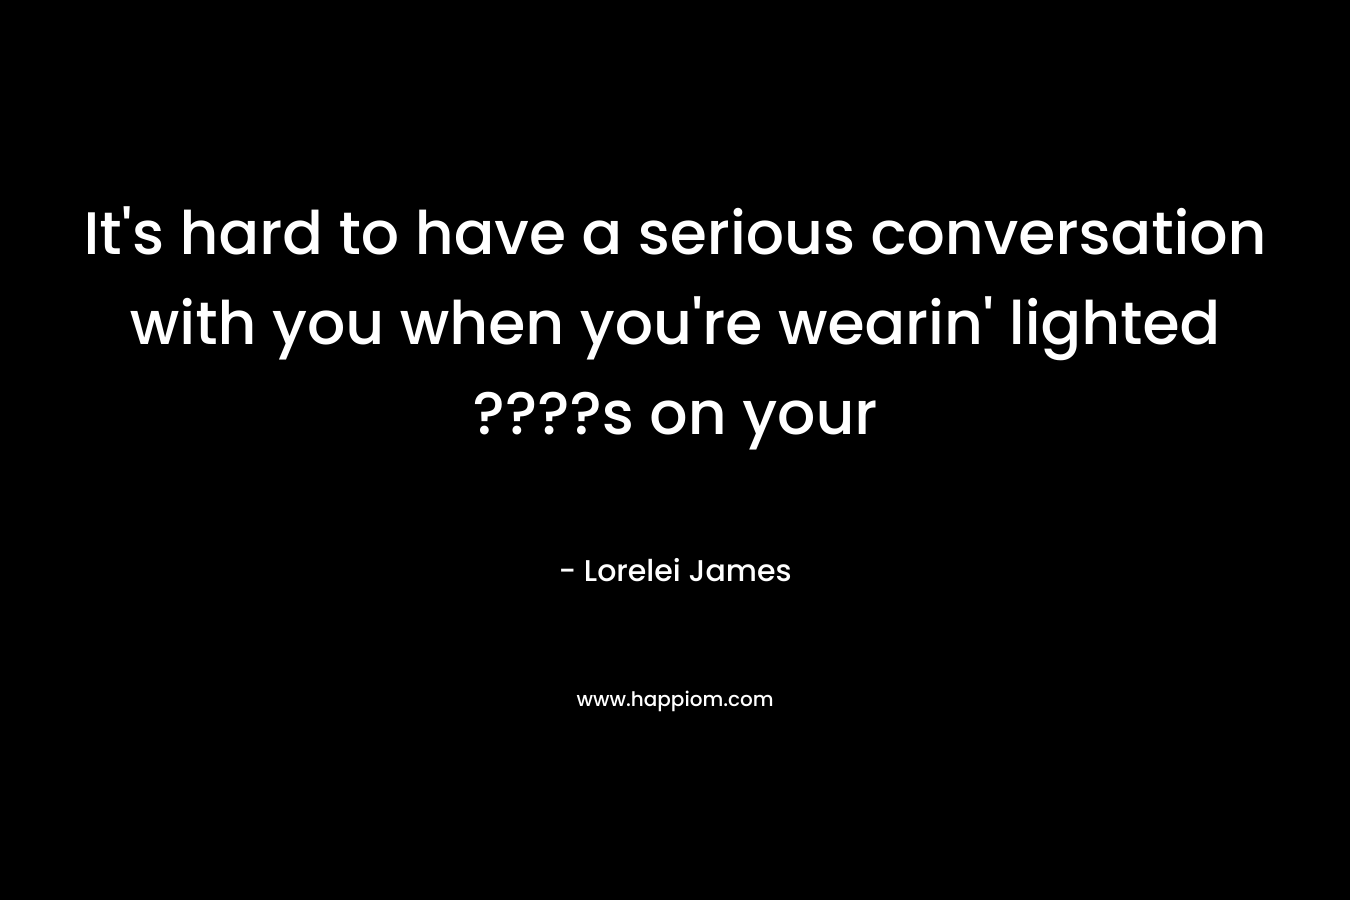 It’s hard to have a serious conversation with you when you’re wearin’ lighted ????s on your  – Lorelei James